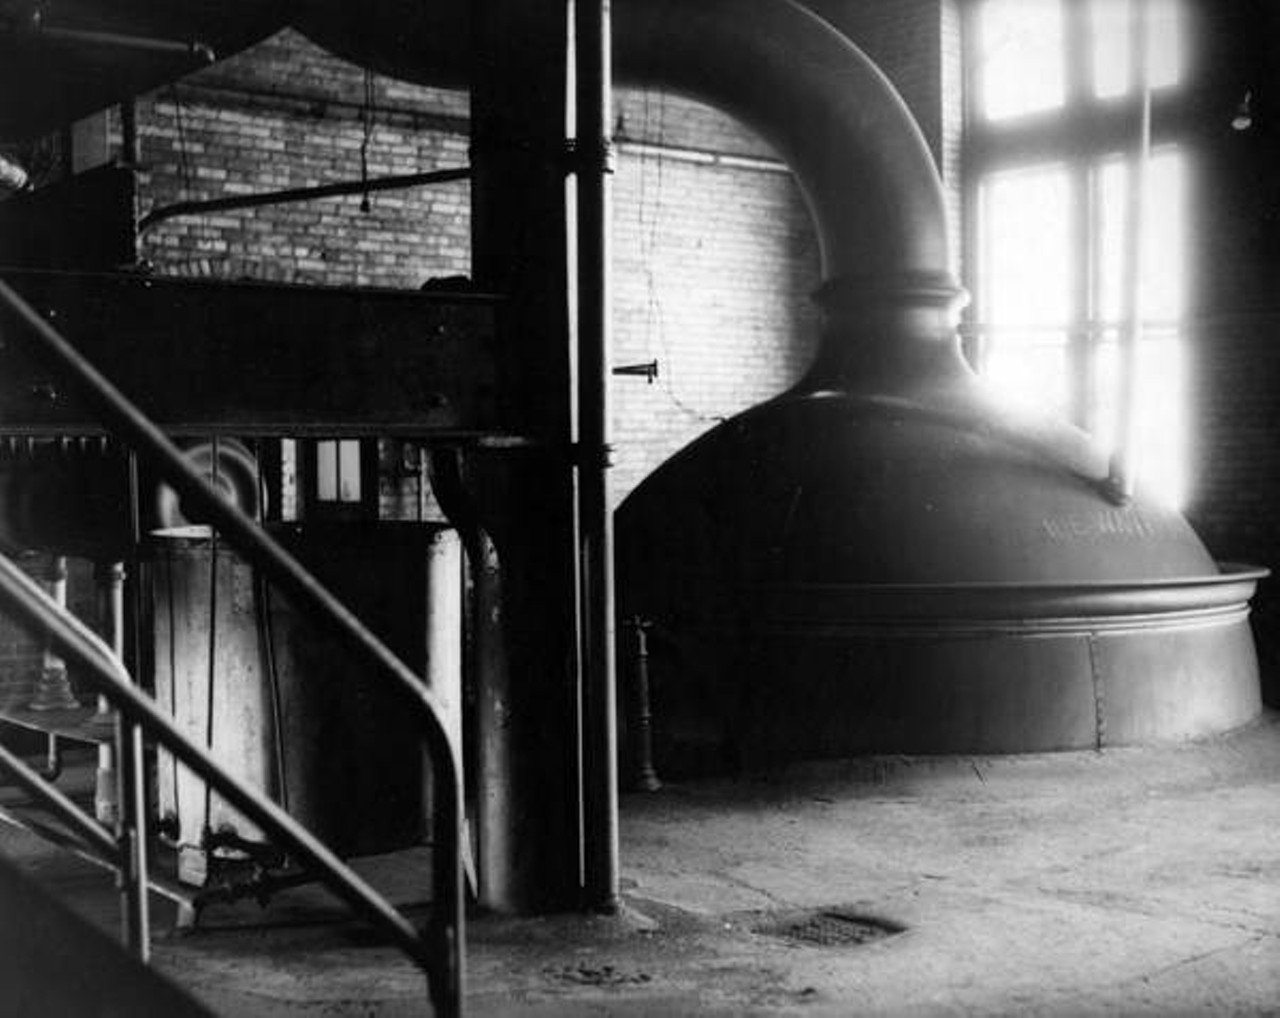  Brew Kettle, Fishel Brewery, East 55th and Grand Avenue, 1932 